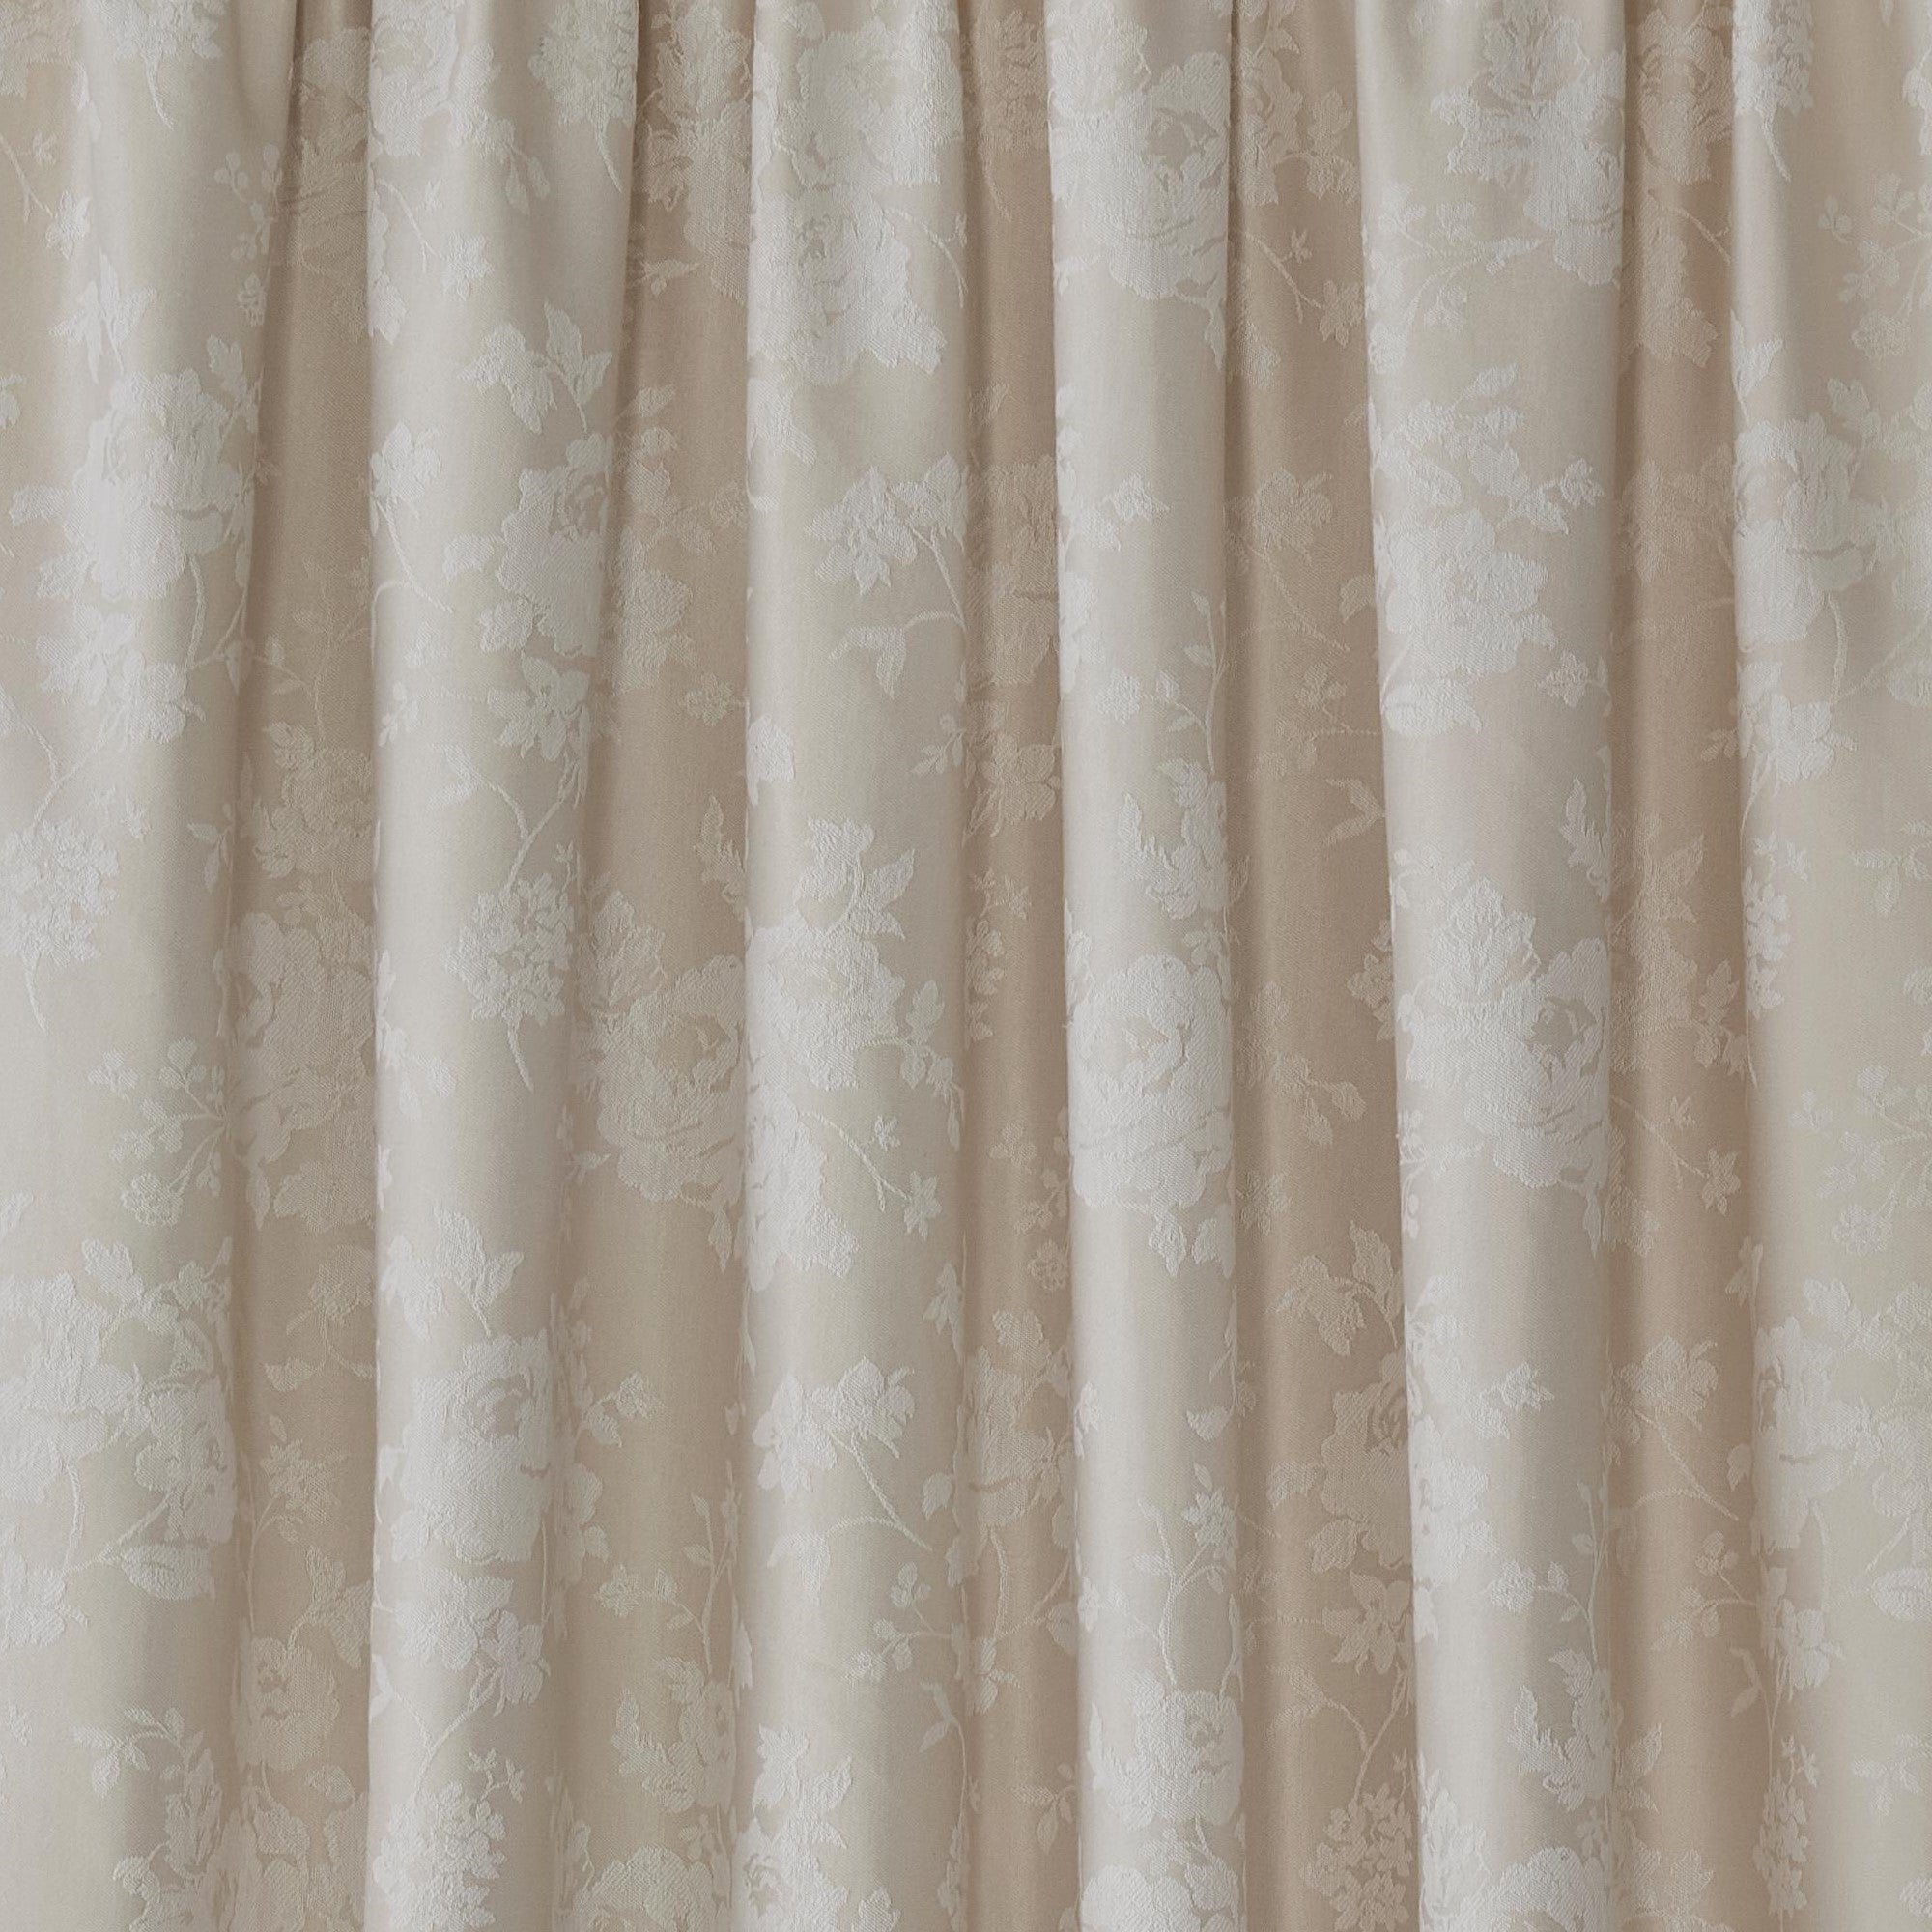 Pair of Pencil Pleat Curtains With Tie-Backs Imelda by Dreams & Drapes Woven in Ivory